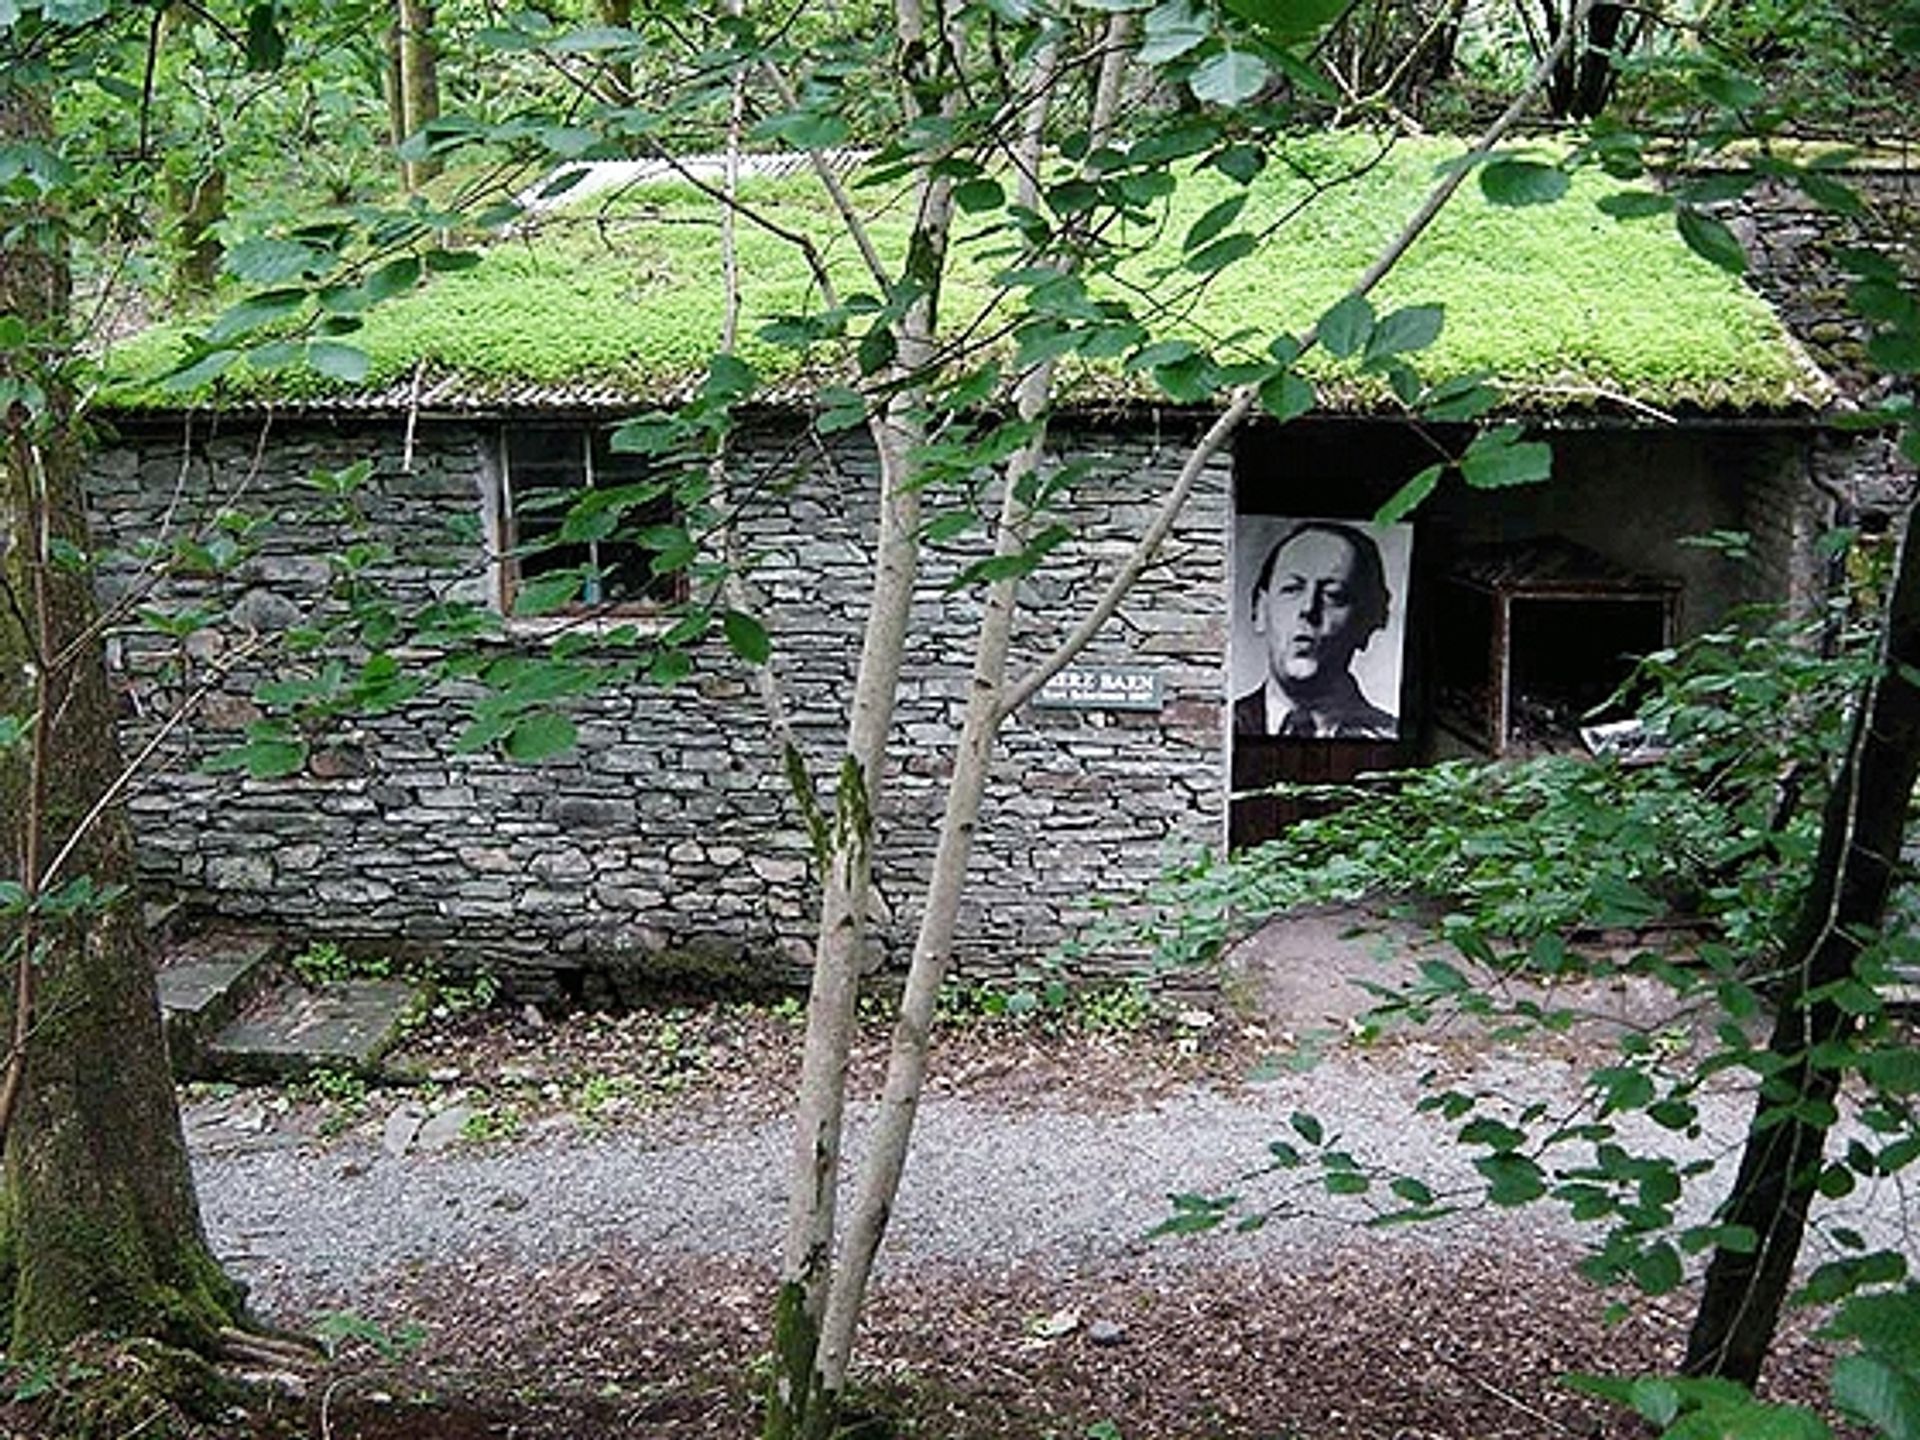 Kurt Schwitters settled in the Lake District in 1945, where he recreated the Merzbau Courtesy of the Littoral Arts Trust